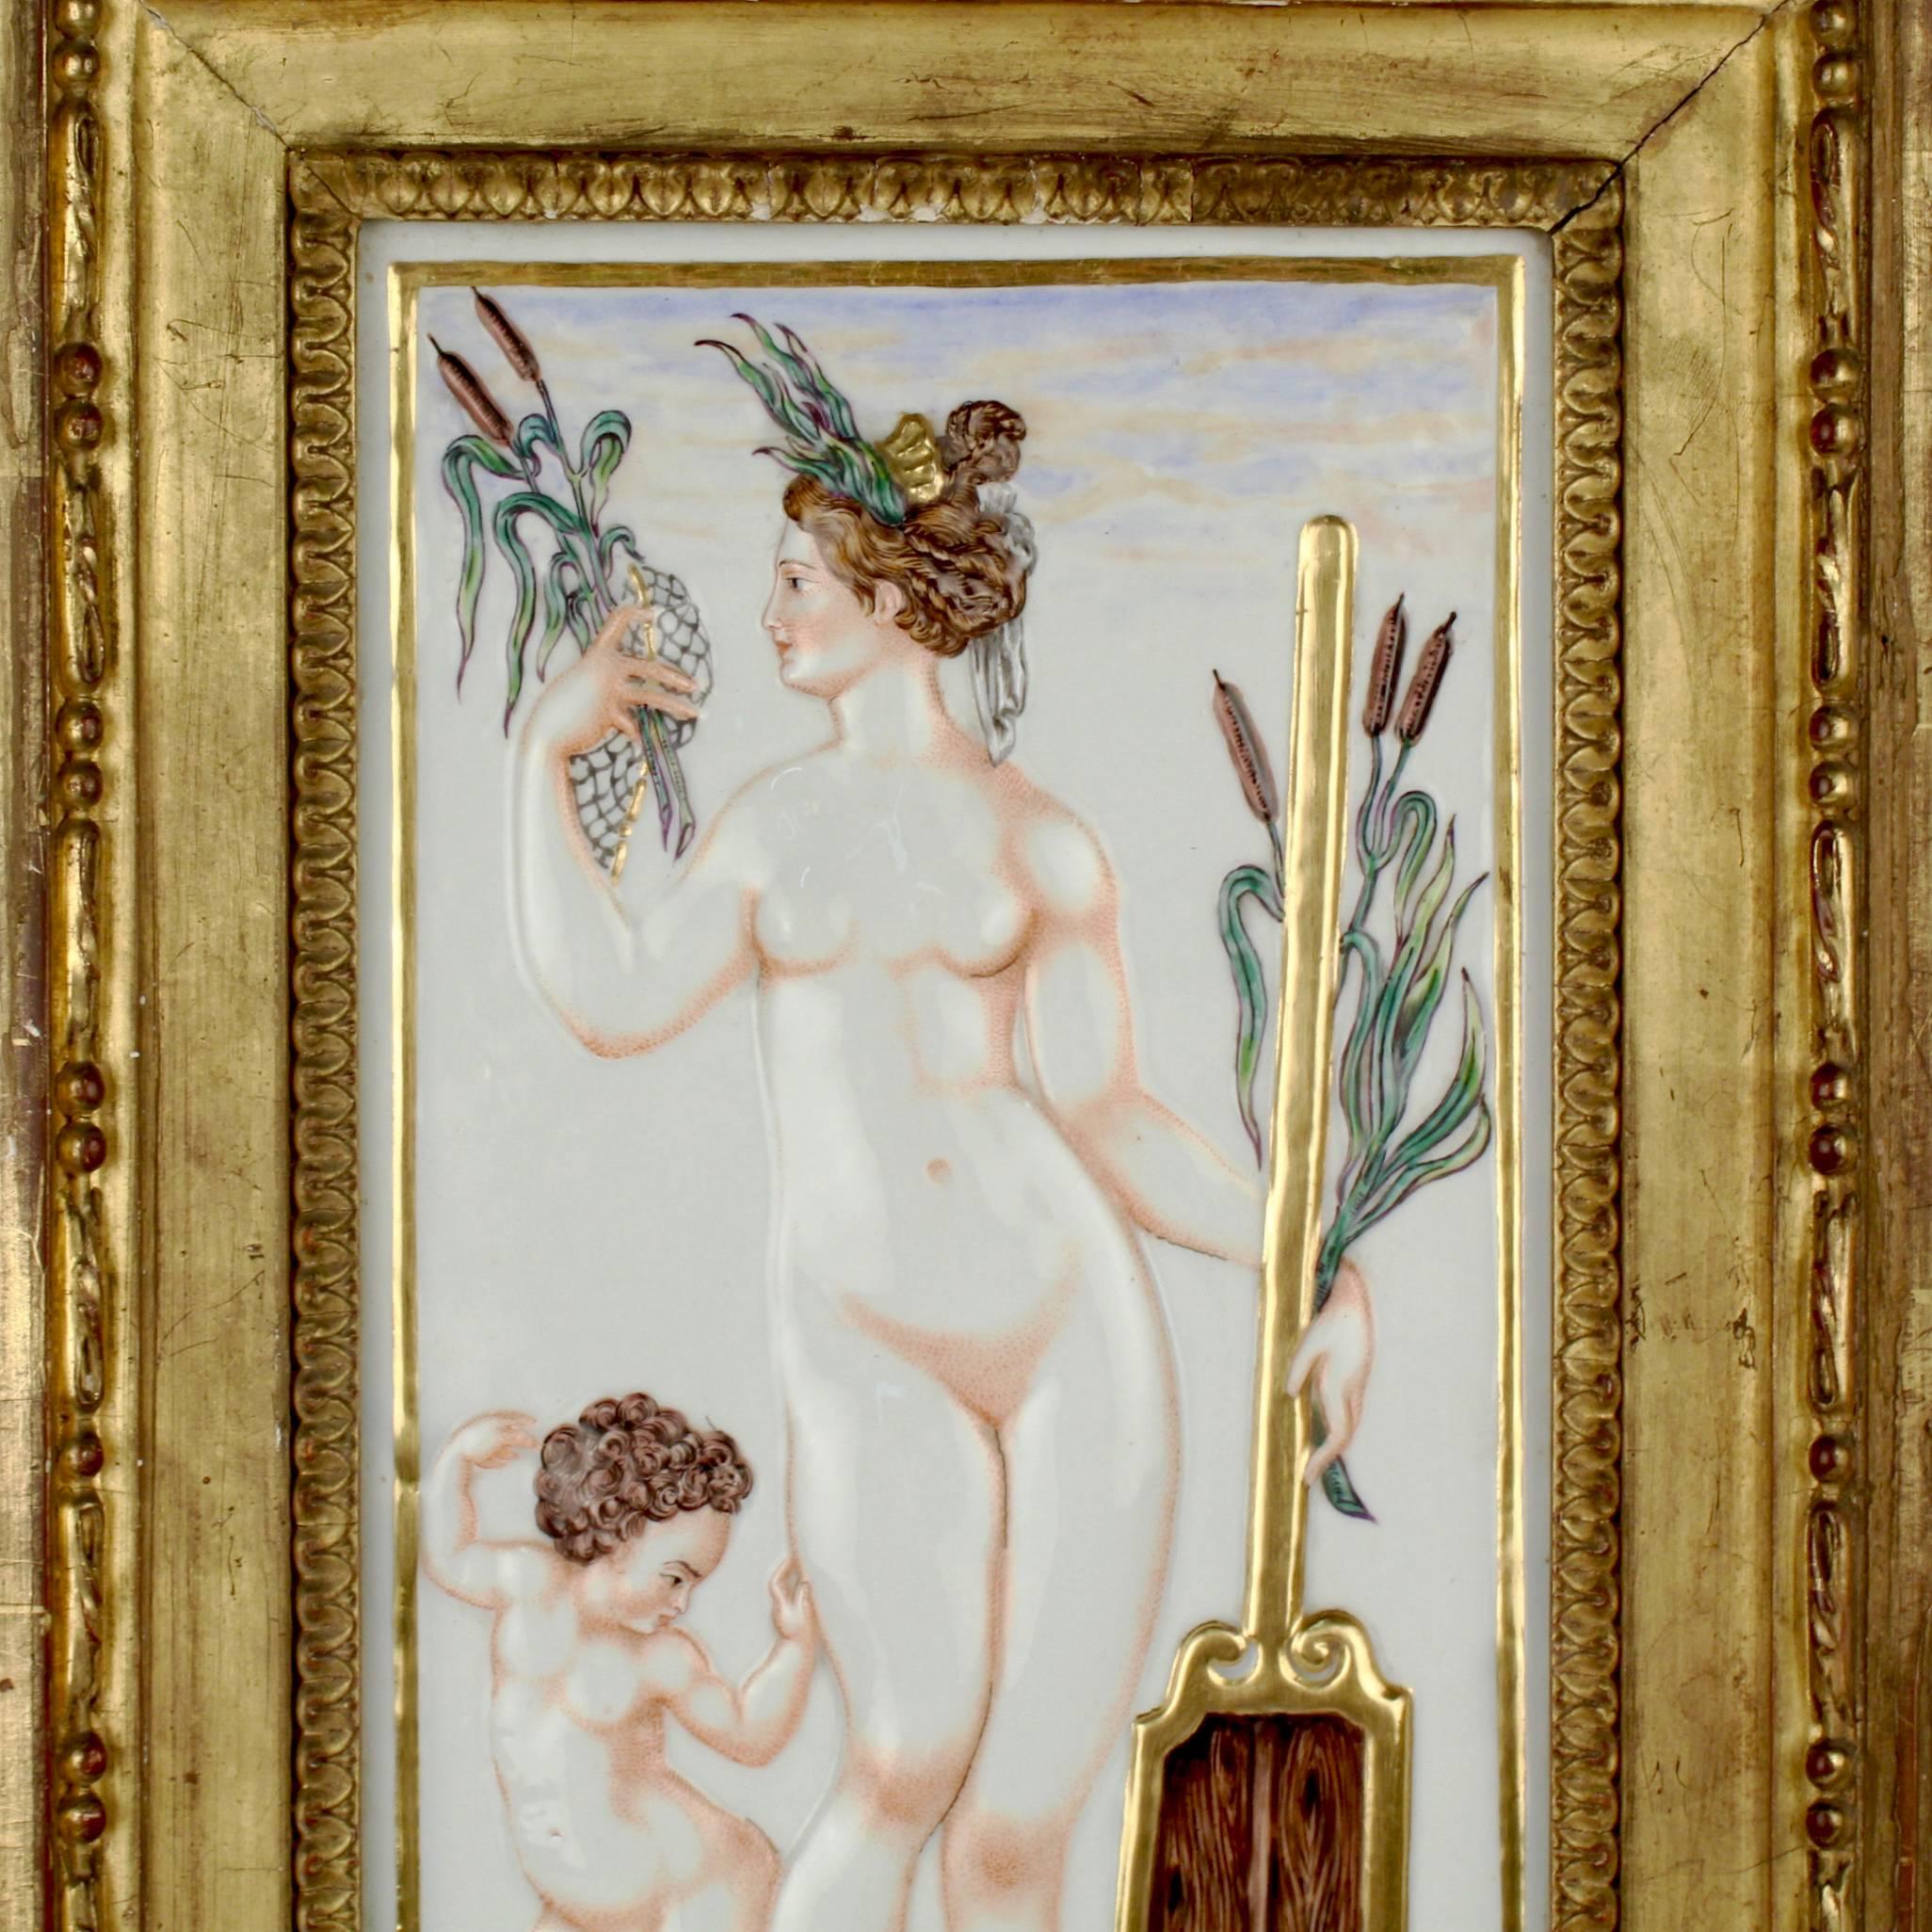 A fine and large-scale Capodimonte porcelain plaque depicting a Naiad (or a water nymph from Greek mythology). She is attended by a small cherub and holds cattails in her hands. The plaque is cast in relief and has polychrome painted decoration with